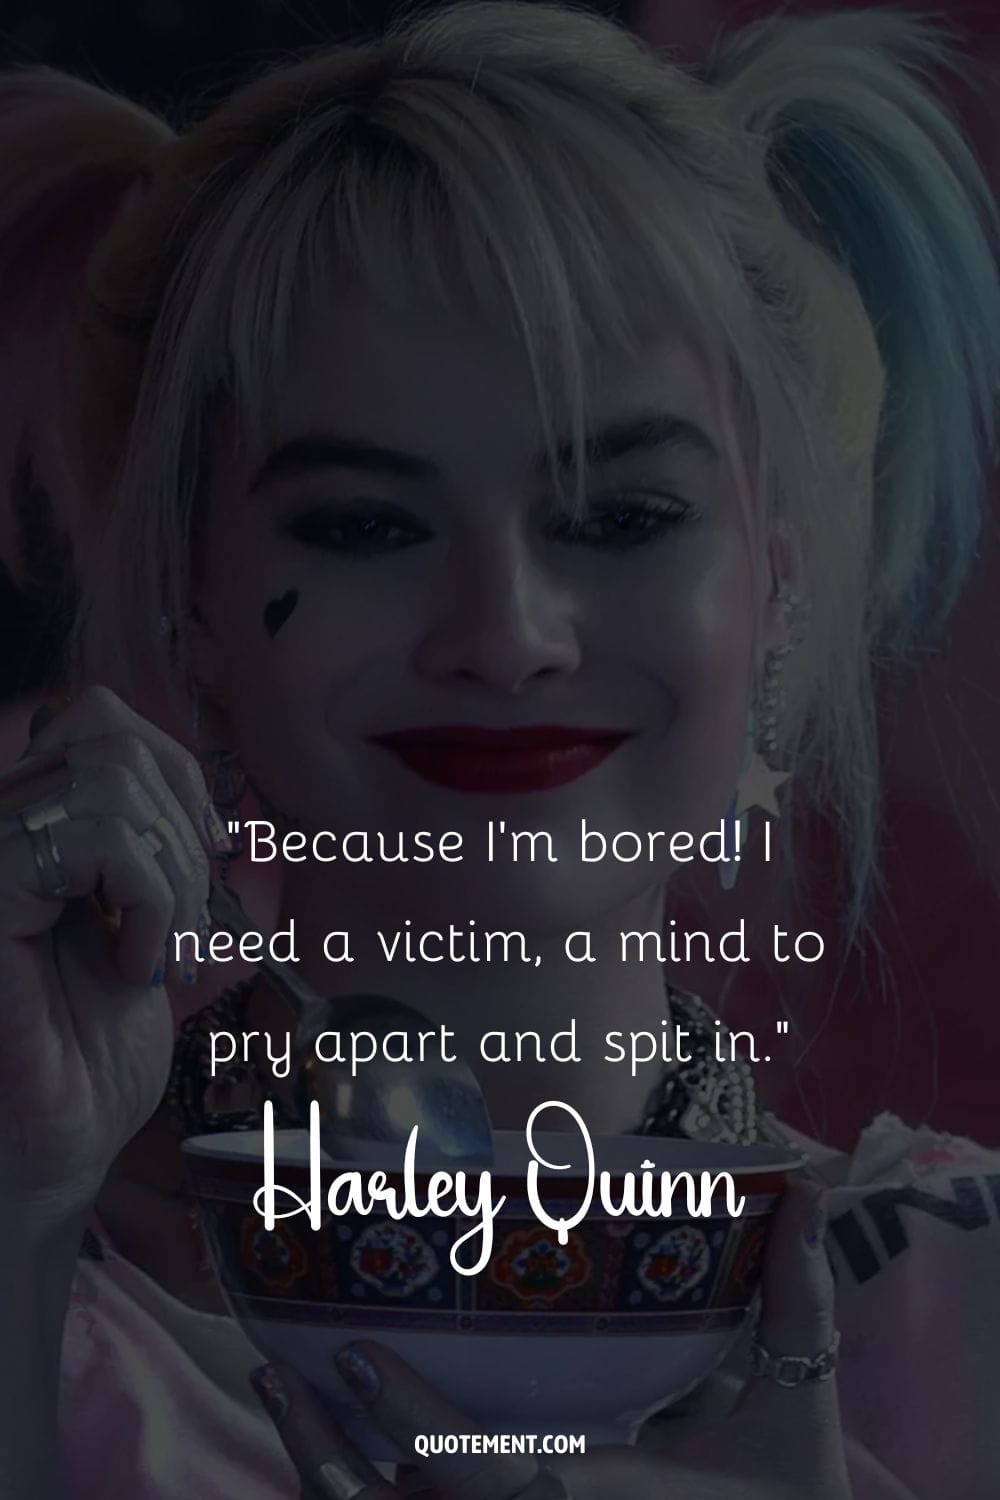 Harley Quinn Unapologetically herself with a wicked sense of humor.